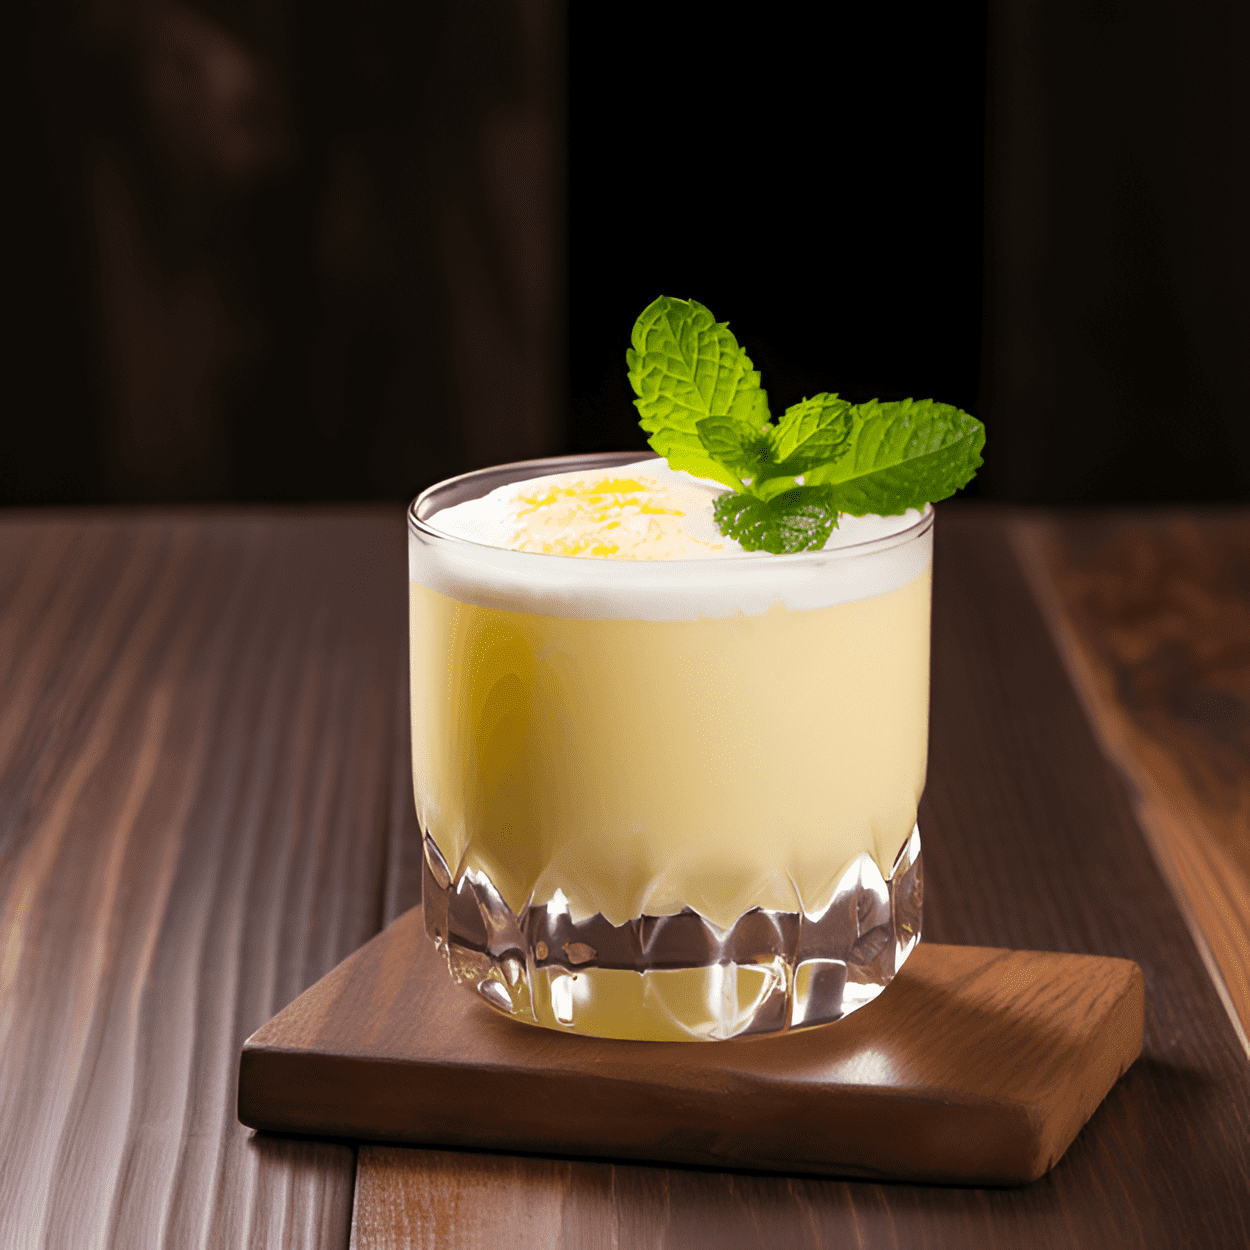 Egg Custard Crush Cocktail Recipe - The Egg Custard Crush is sweet, creamy, and slightly spicy. The egg custard gives it a rich, velvety texture, while the vodka adds a bit of a kick. The sweetness of the custard is balanced by the slight tartness of the lemon juice, making for a well-rounded, satisfying drink.